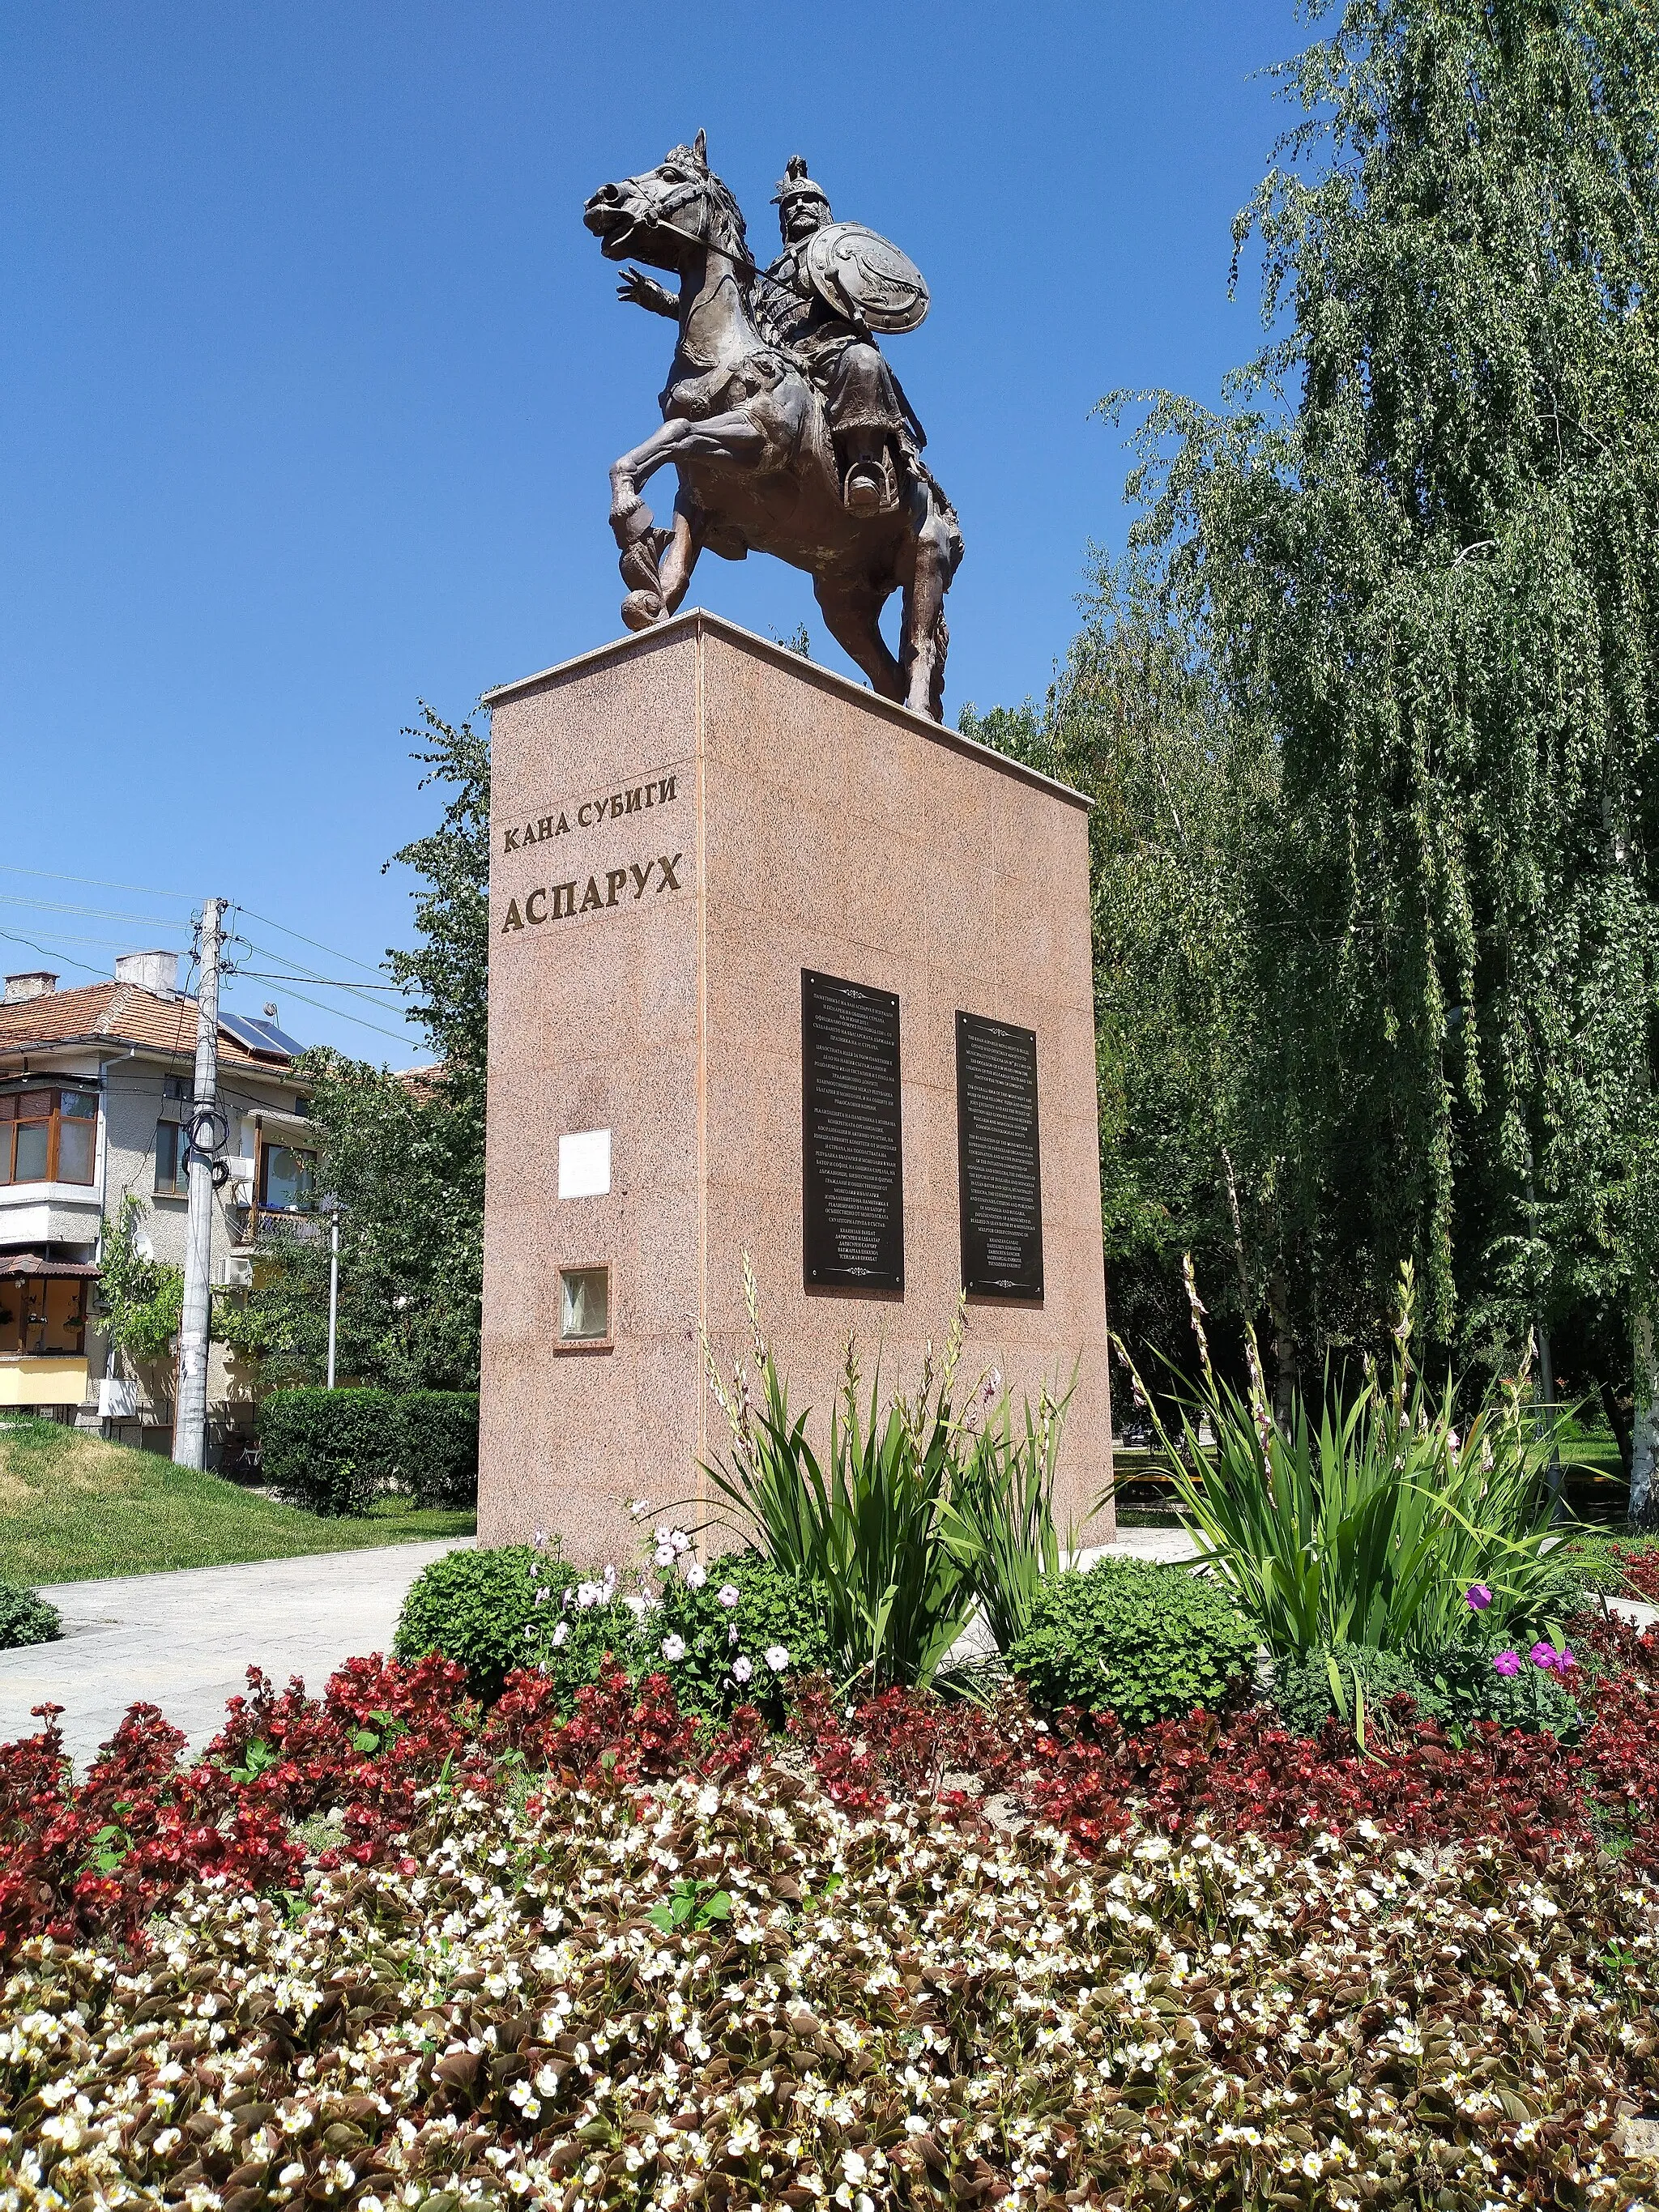 Photo showing: Monument in Strelcha, Bulgaria